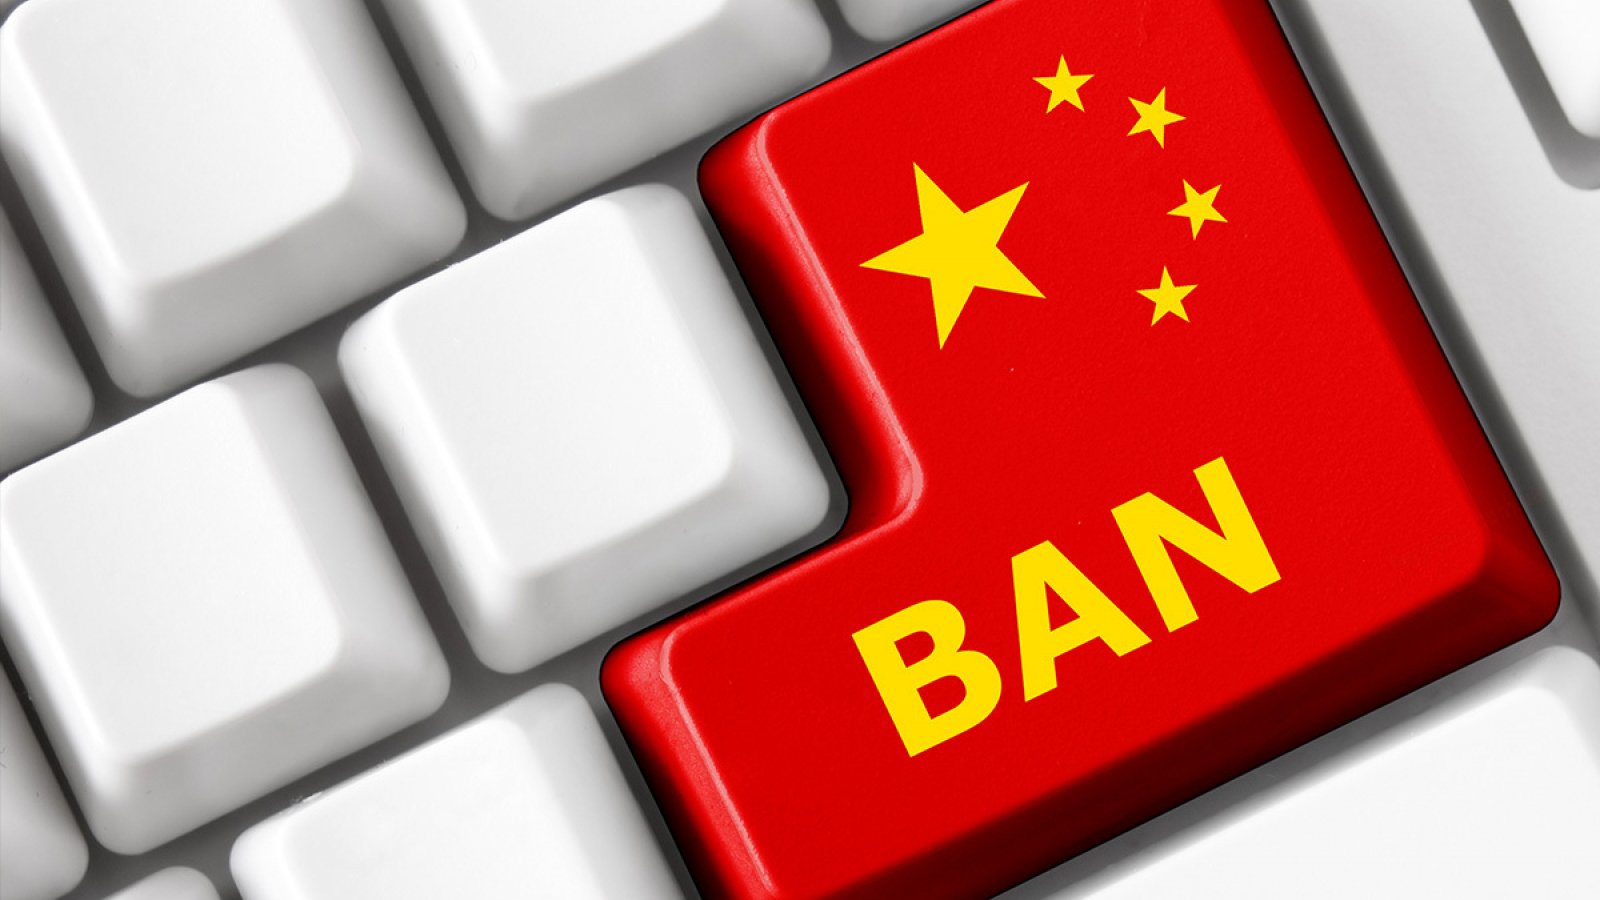 Huobi has terminated services for Chinese users, will other exchanges follow?